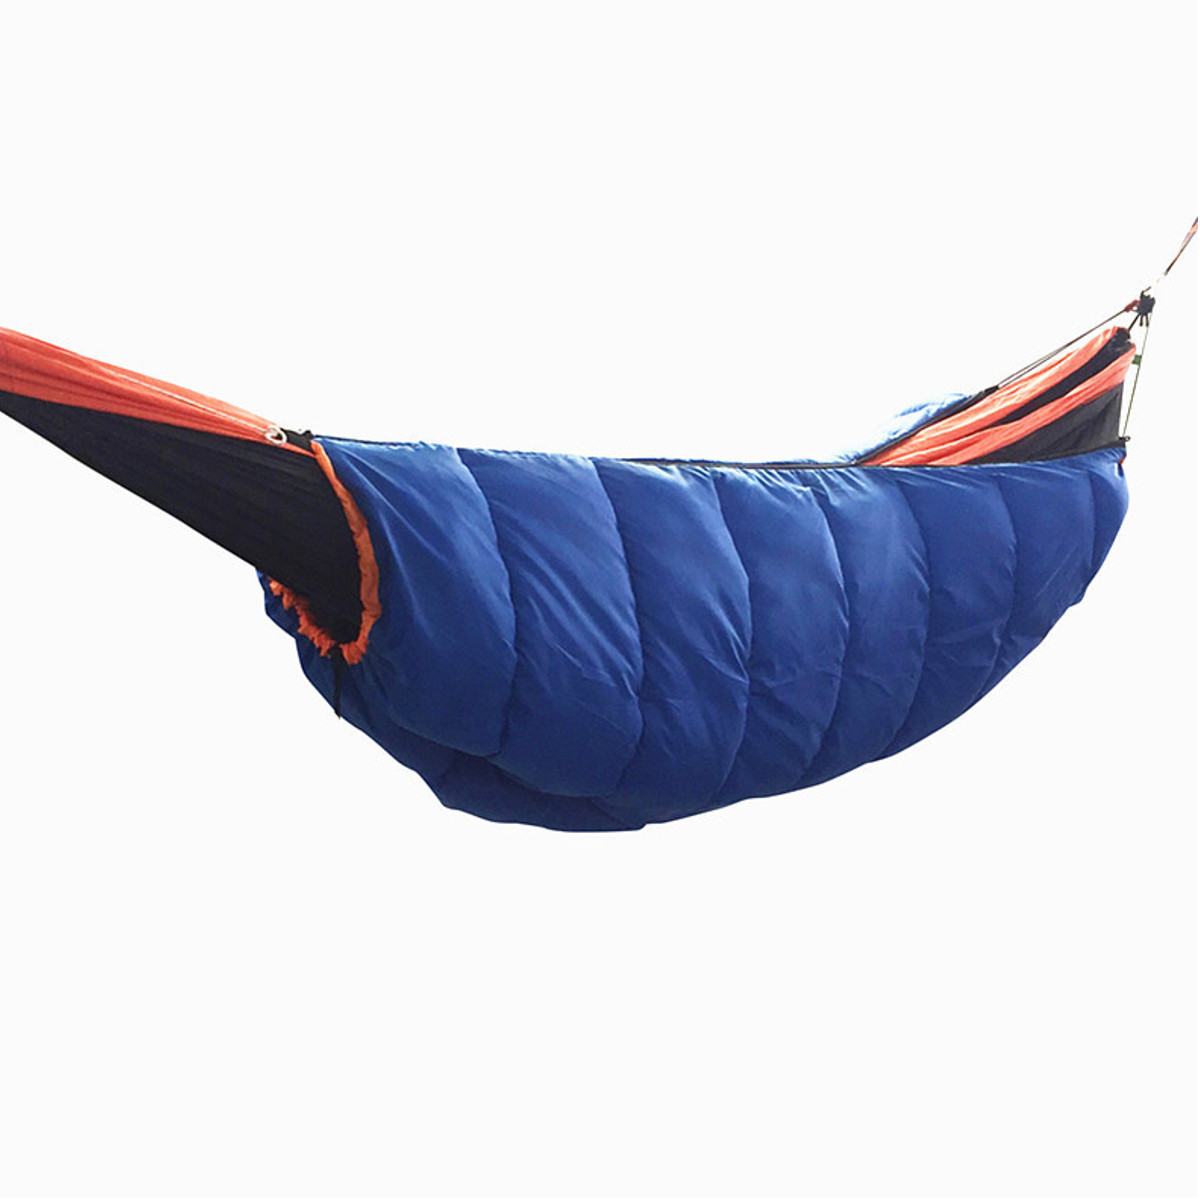 

185x70cm Warm Hammock Underquilt Outdoor Camping Sleeping Bag Portable Insulation Cover